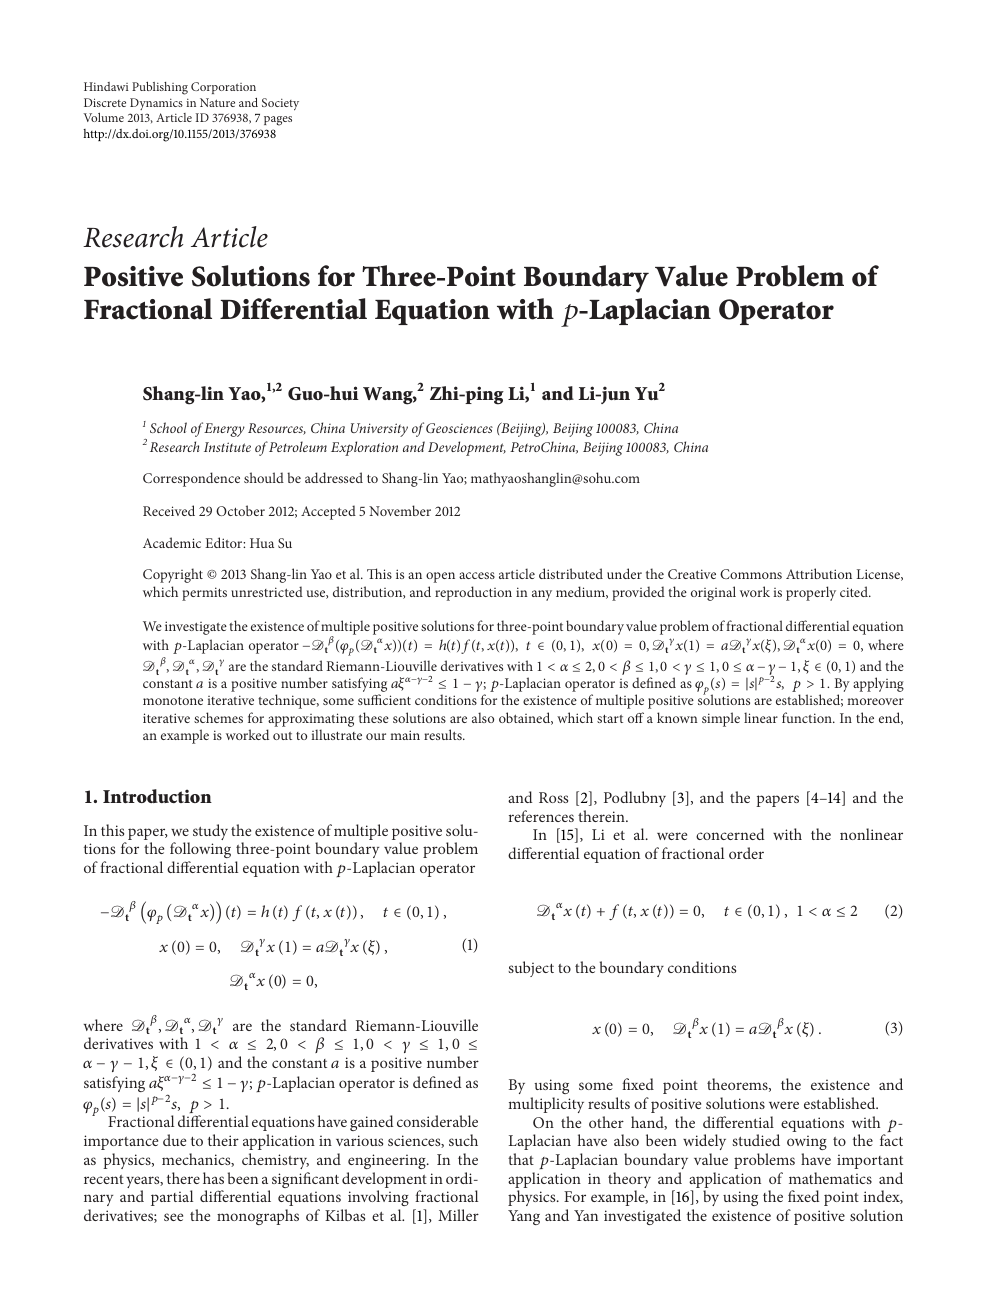 Positive Solutions For Three Point Boundary Value Problem Of Fractional Differential Equation With Laplacian Operator Topic Of Research Paper In Mathematics Download Scholarly Article Pdf And Read For Free On Cyberleninka Open